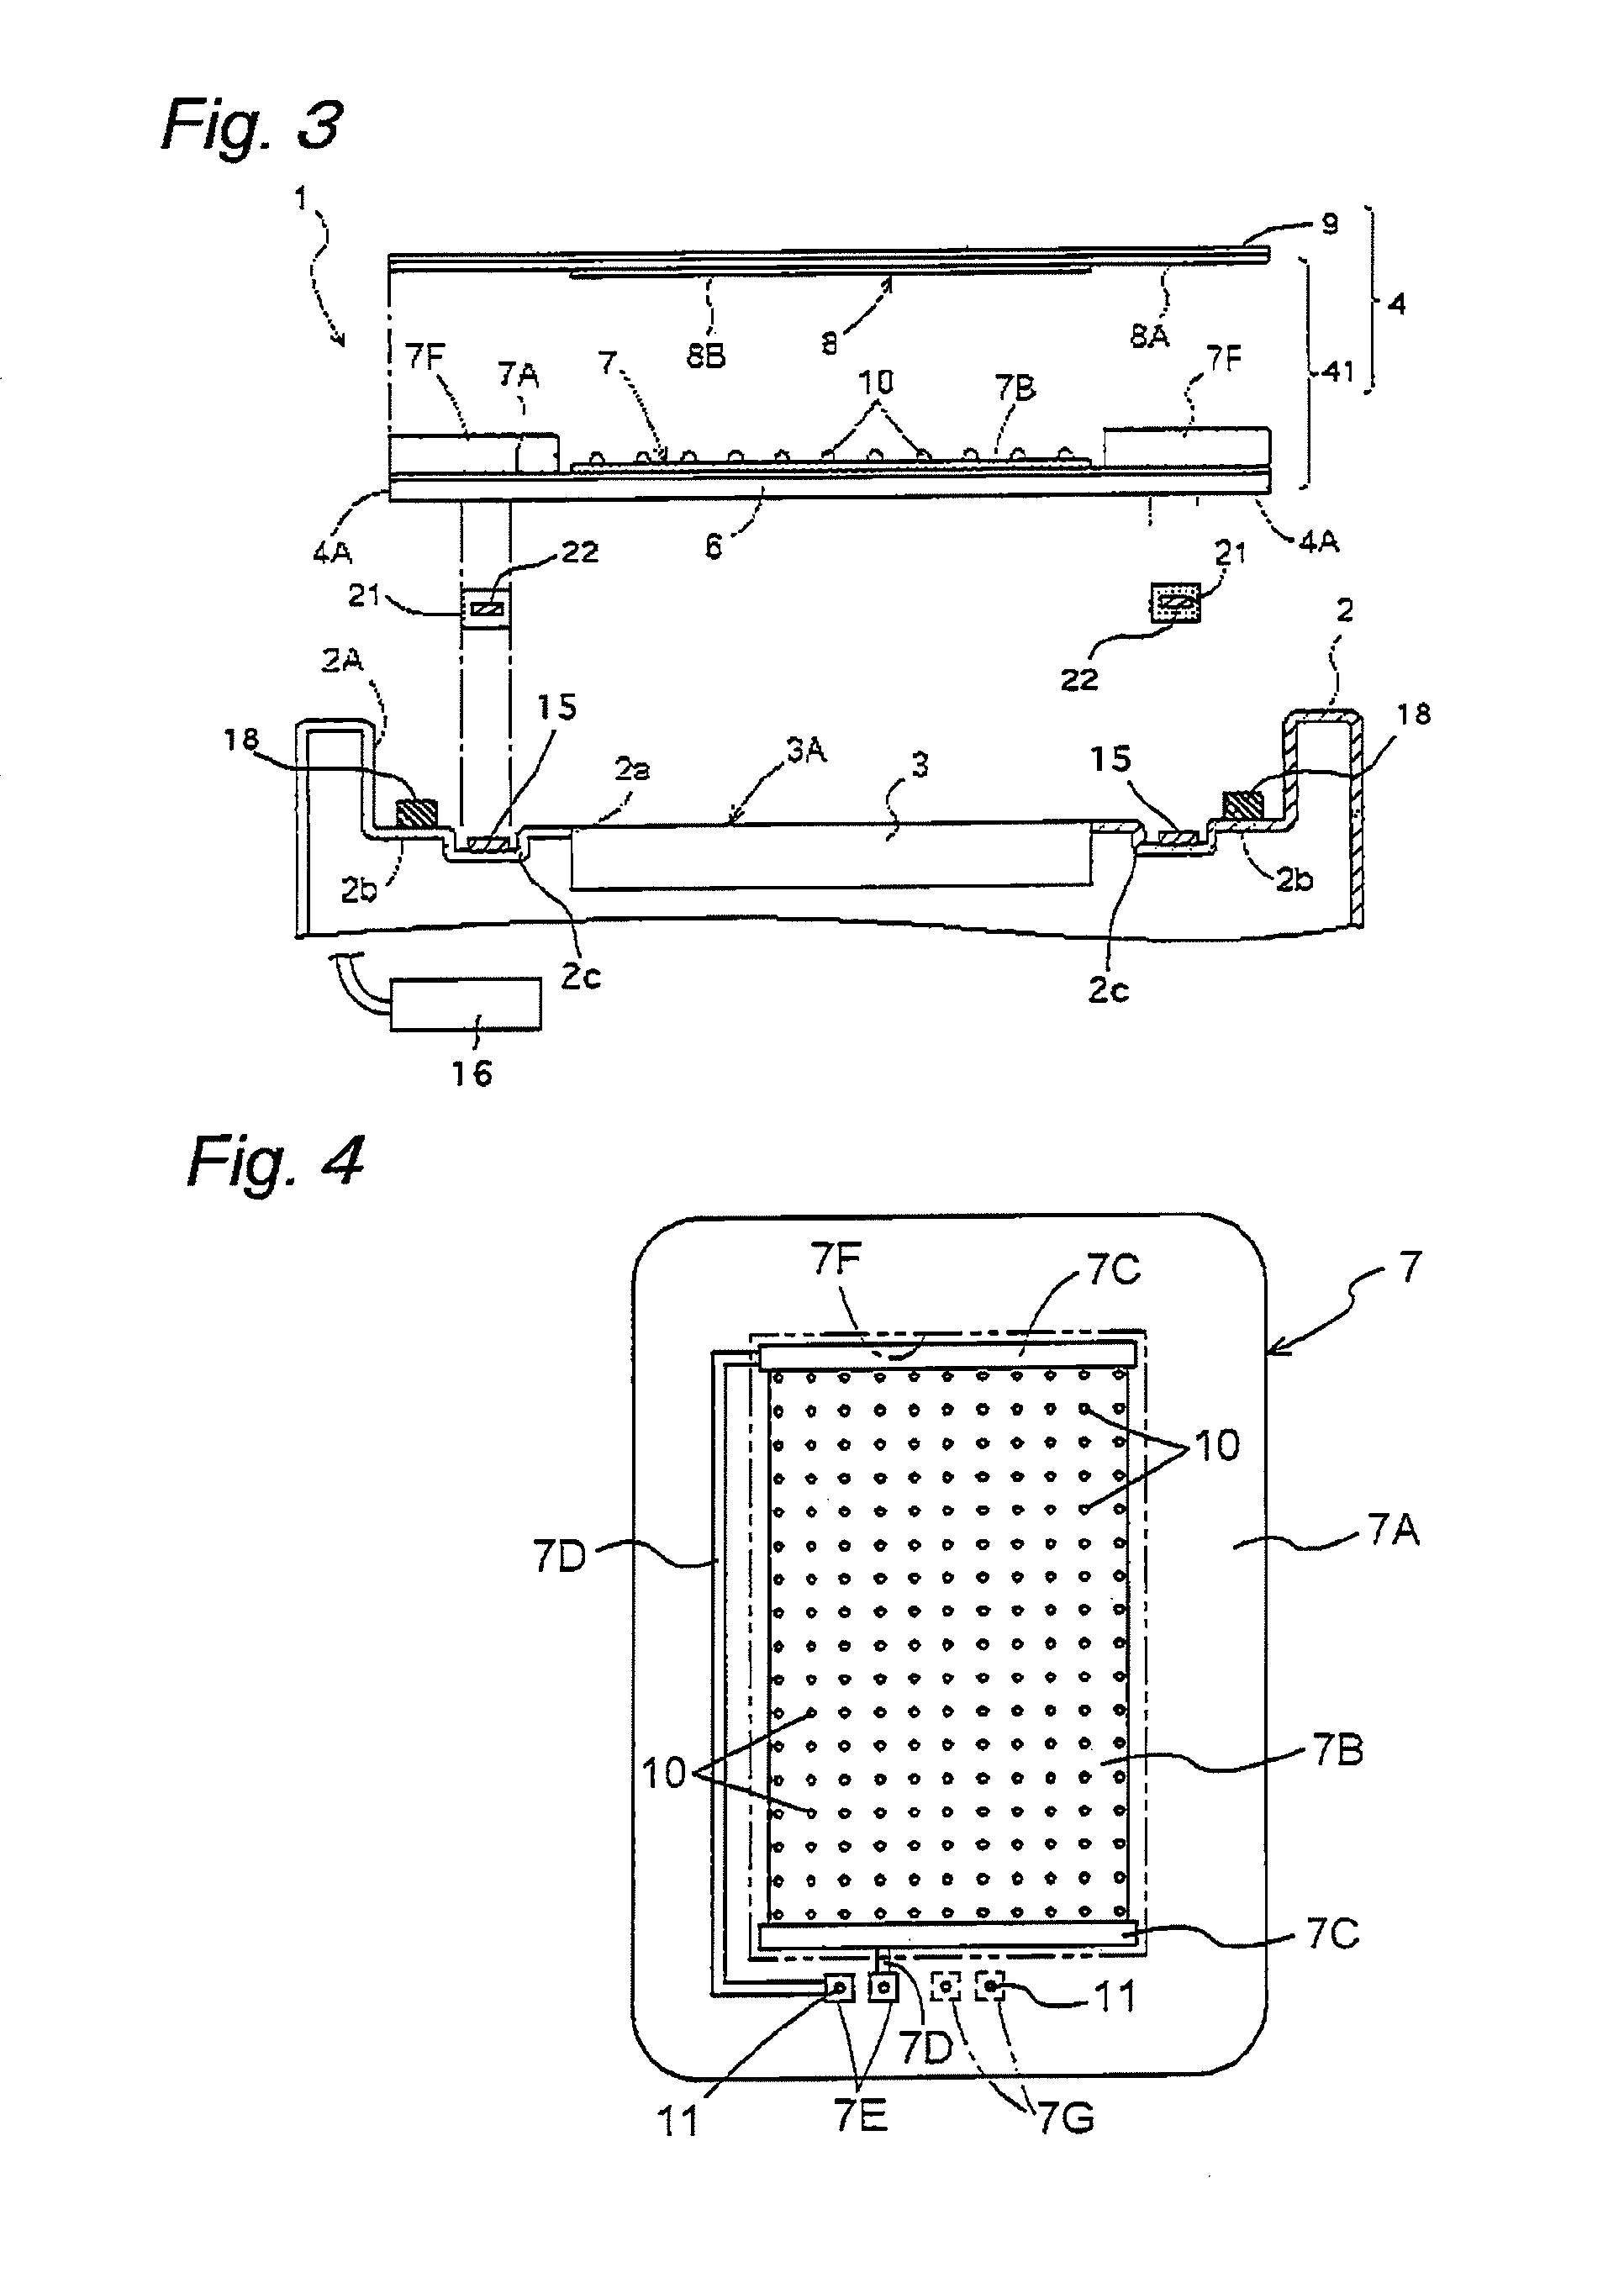 Mount structure of touch panel with vibration function